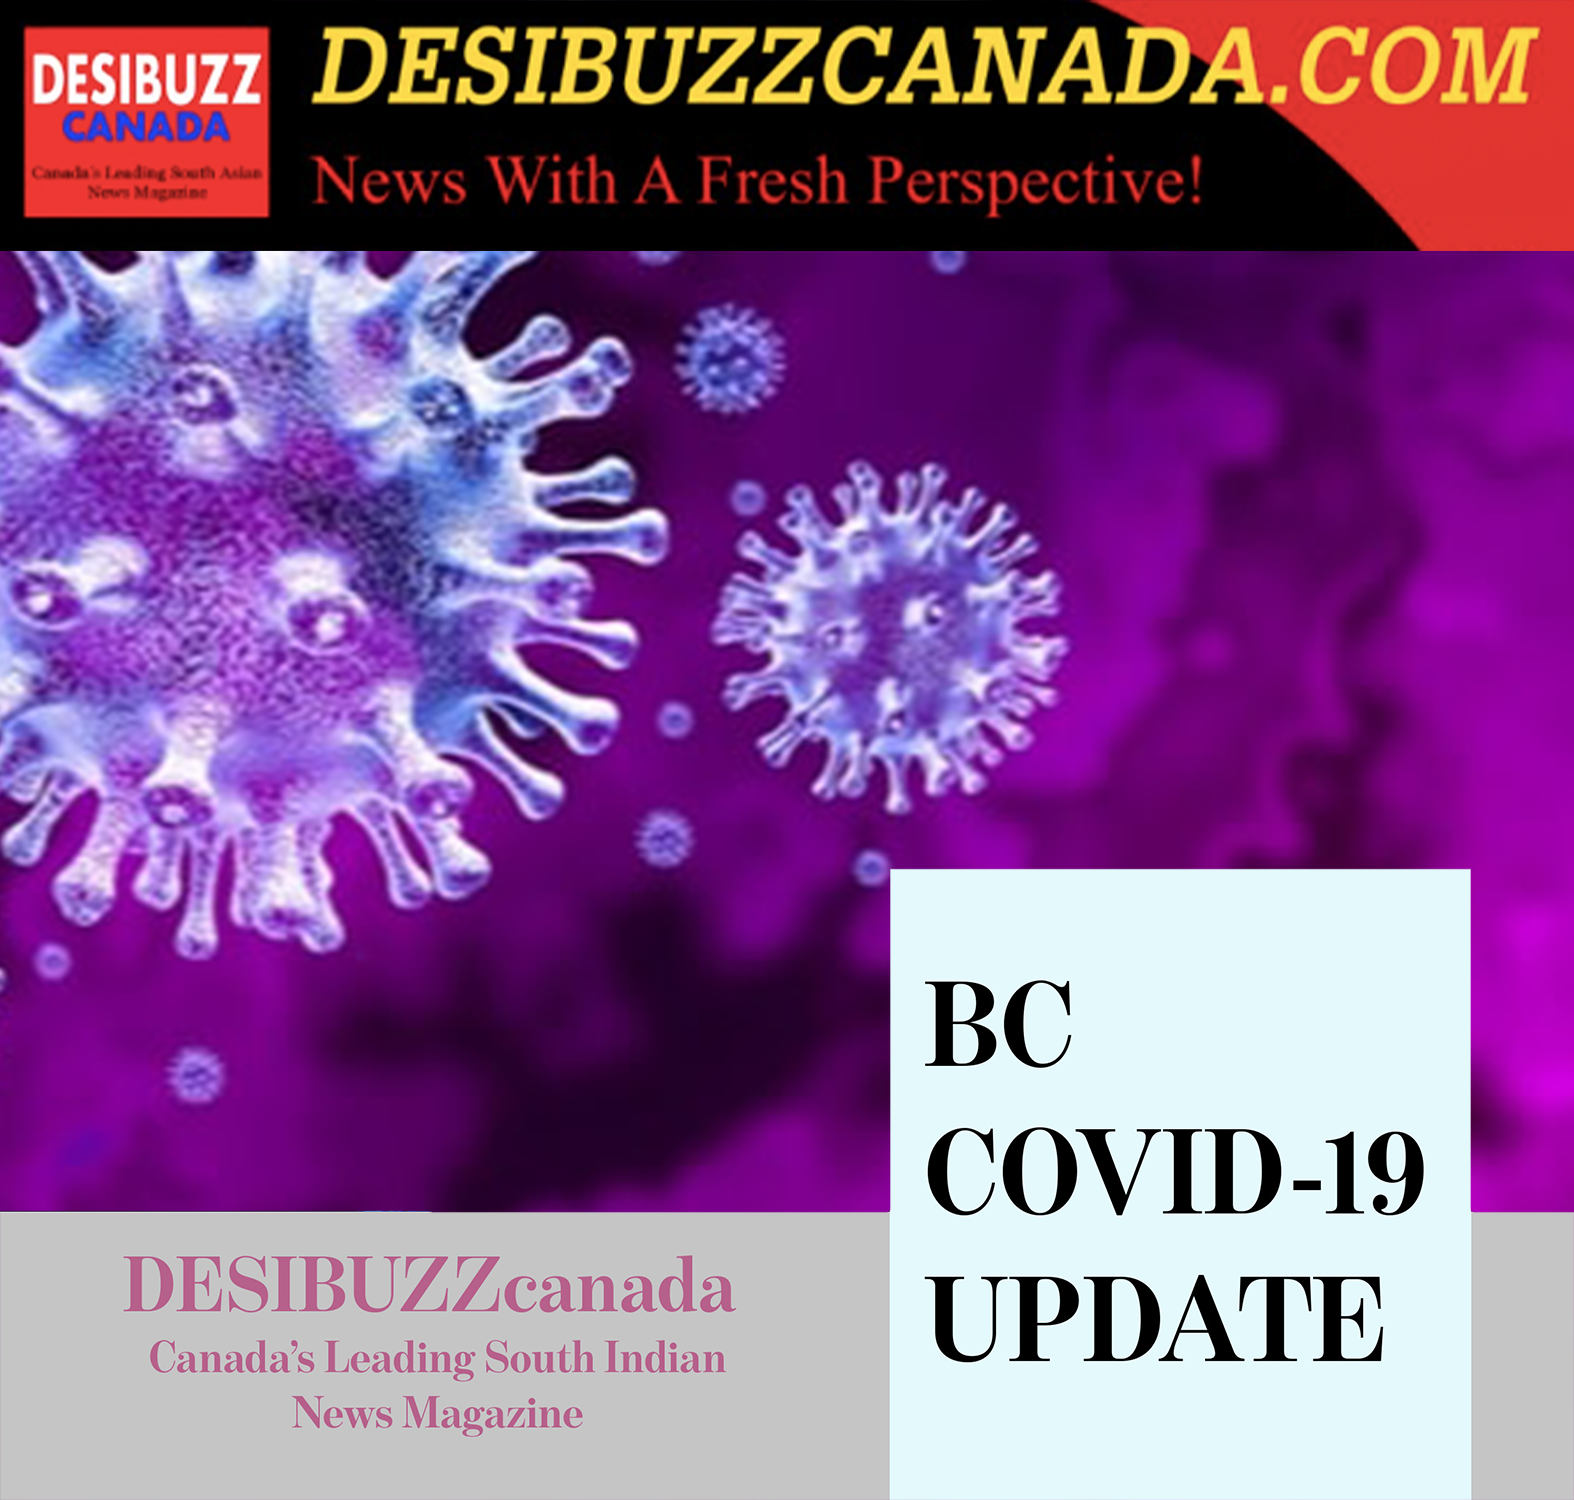 BC COVID-19 UPDATE: Mask Mandate Now Officially Over But Pandemic Continues With Over 200 Cases And Three Deaths